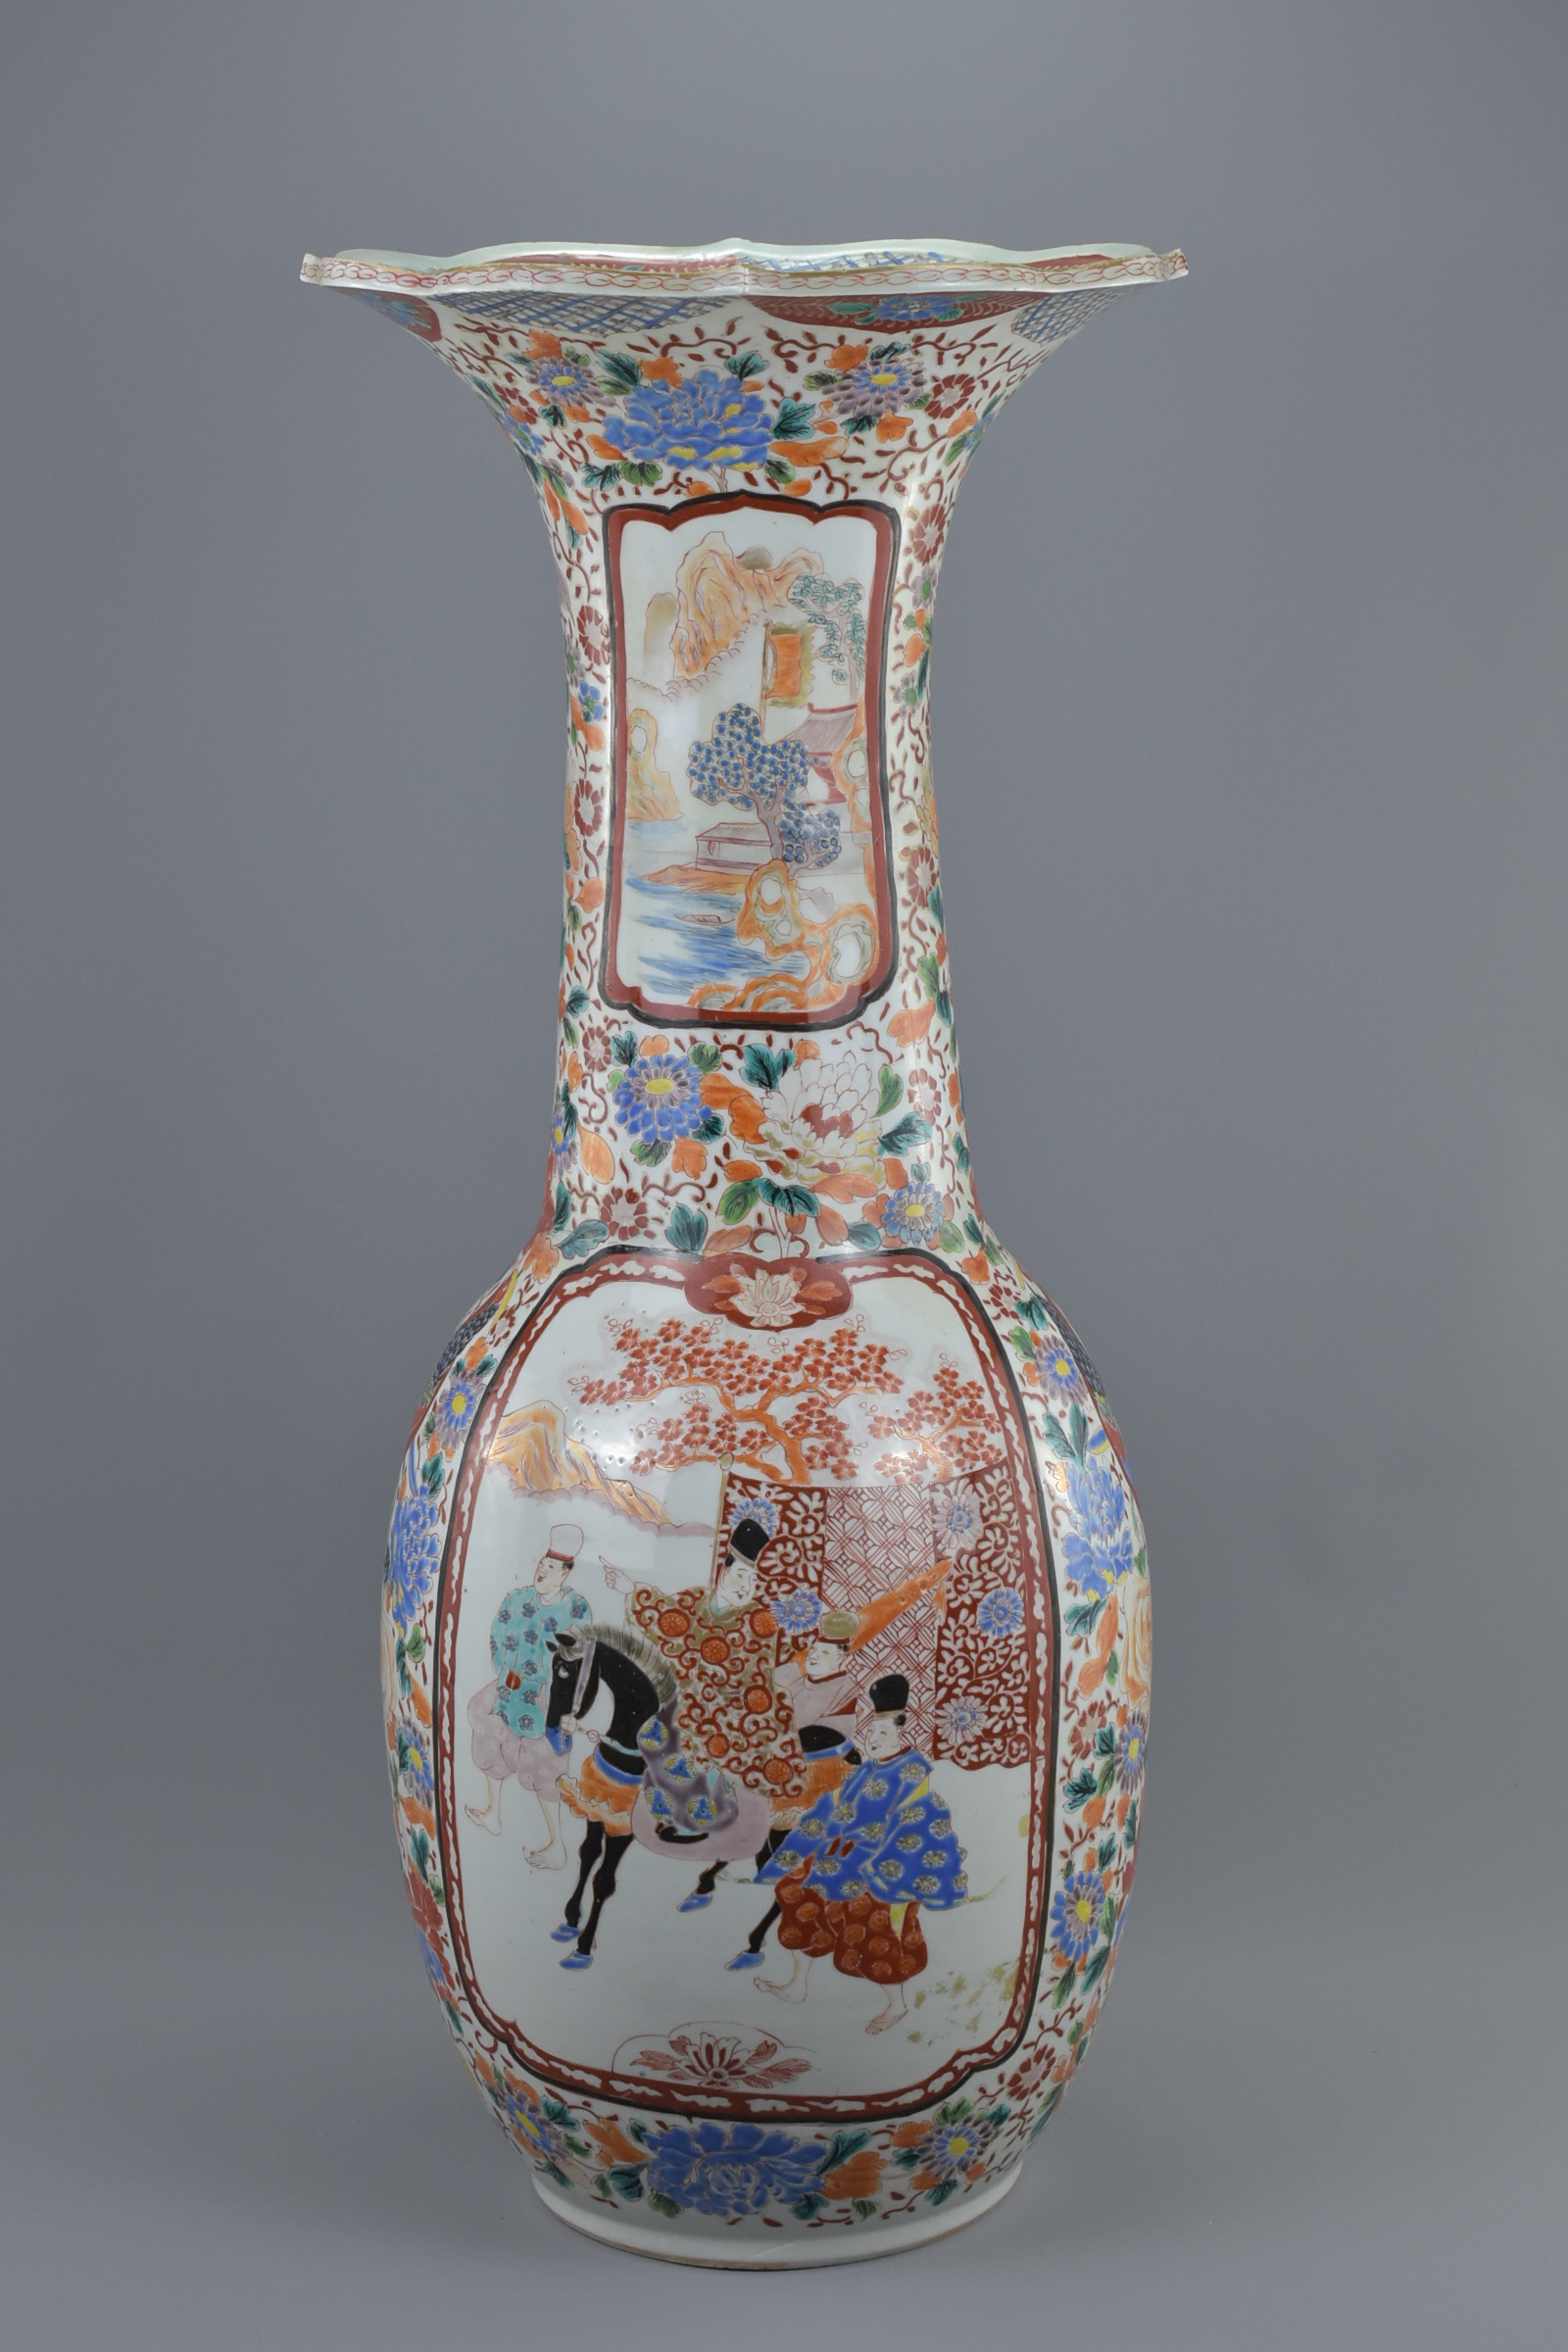 A very large 19th century Japanese Imari fluted porcelain vase decorated panels of birds and figure.